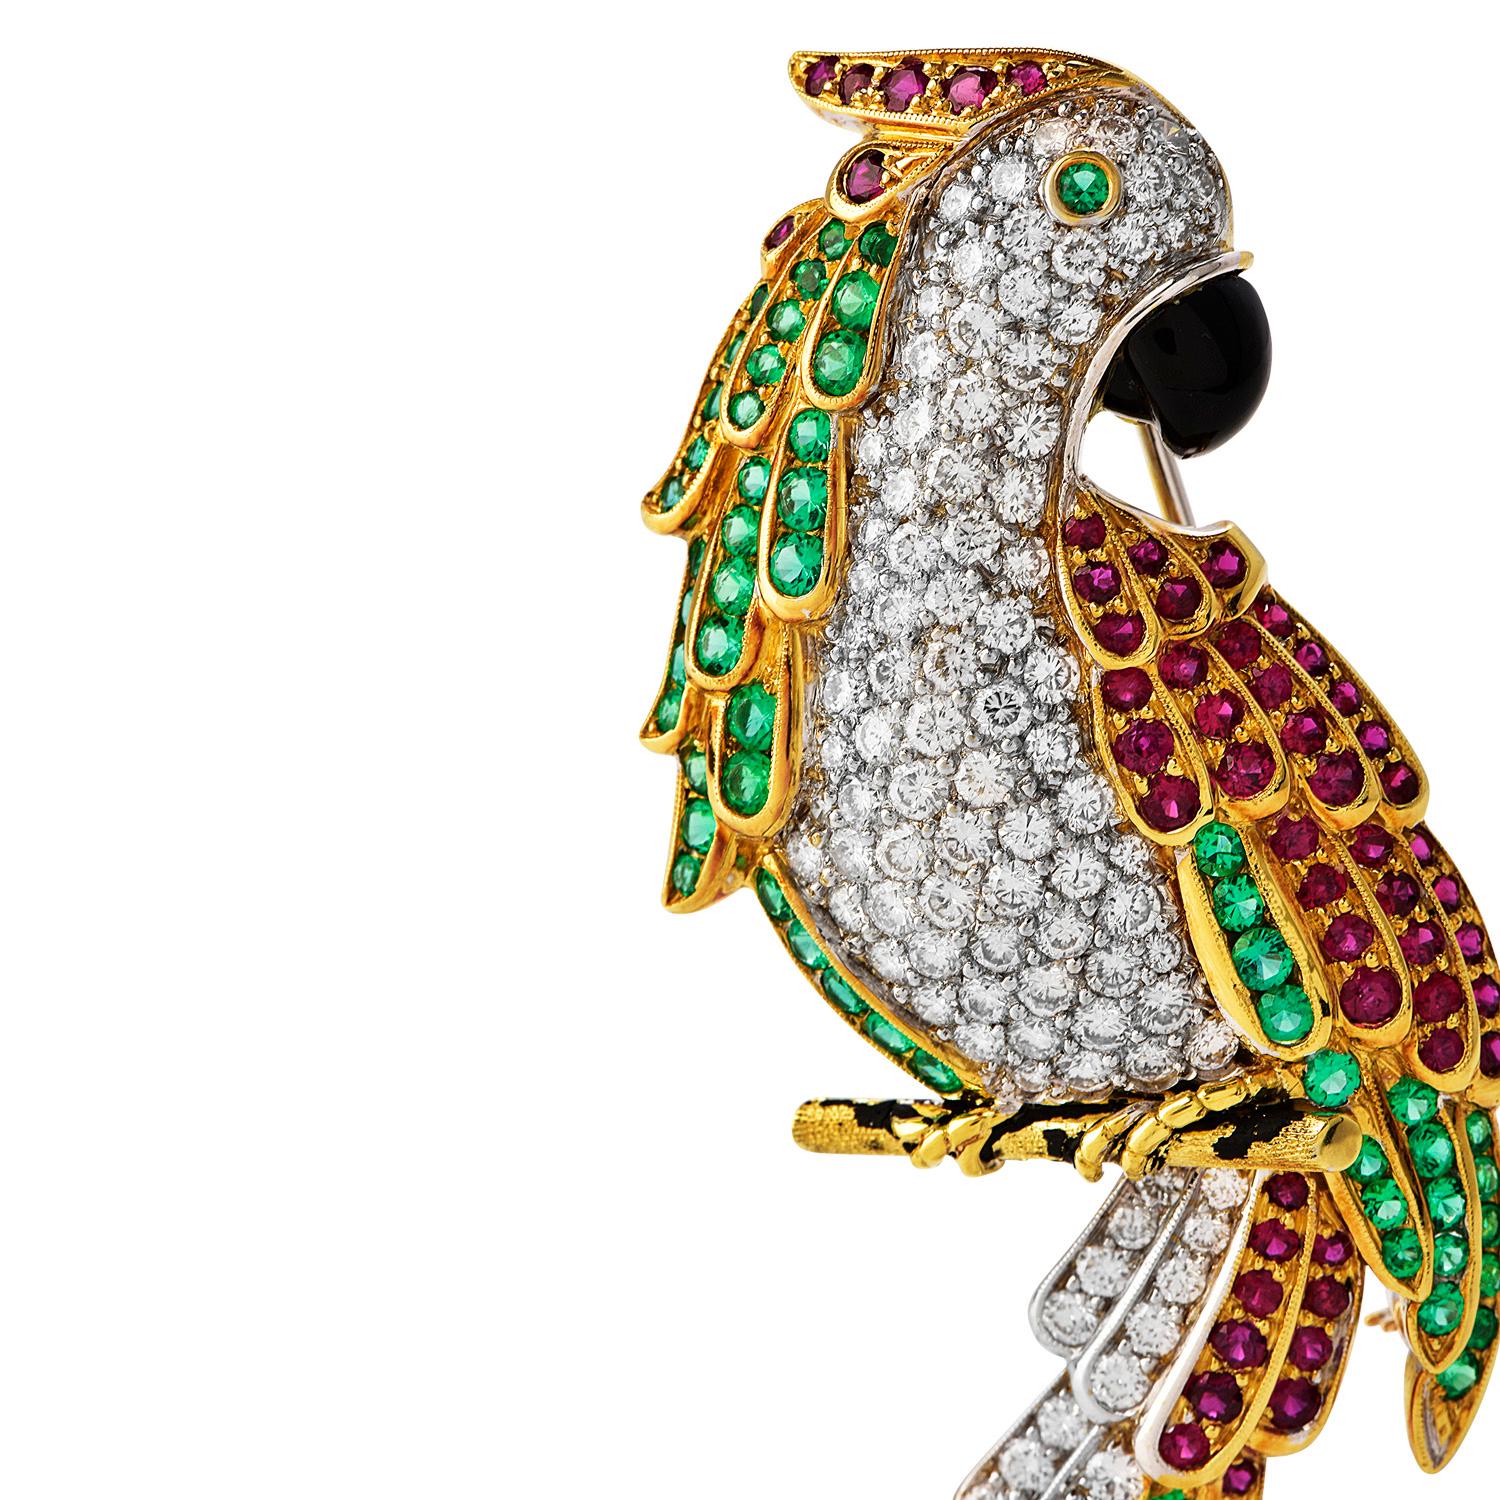 Vintage Diamond Ruby Emerald Onyx18K Gold Parrot Pin Brooch

See life in Vivid colors with these exquisite Diamond, Ruby, Emerald, and  Onyx18K Gold Elegant Parrot Pin Brooch

with a total approximate weight of 23.7 grams.

Expertly Crafted in Solid